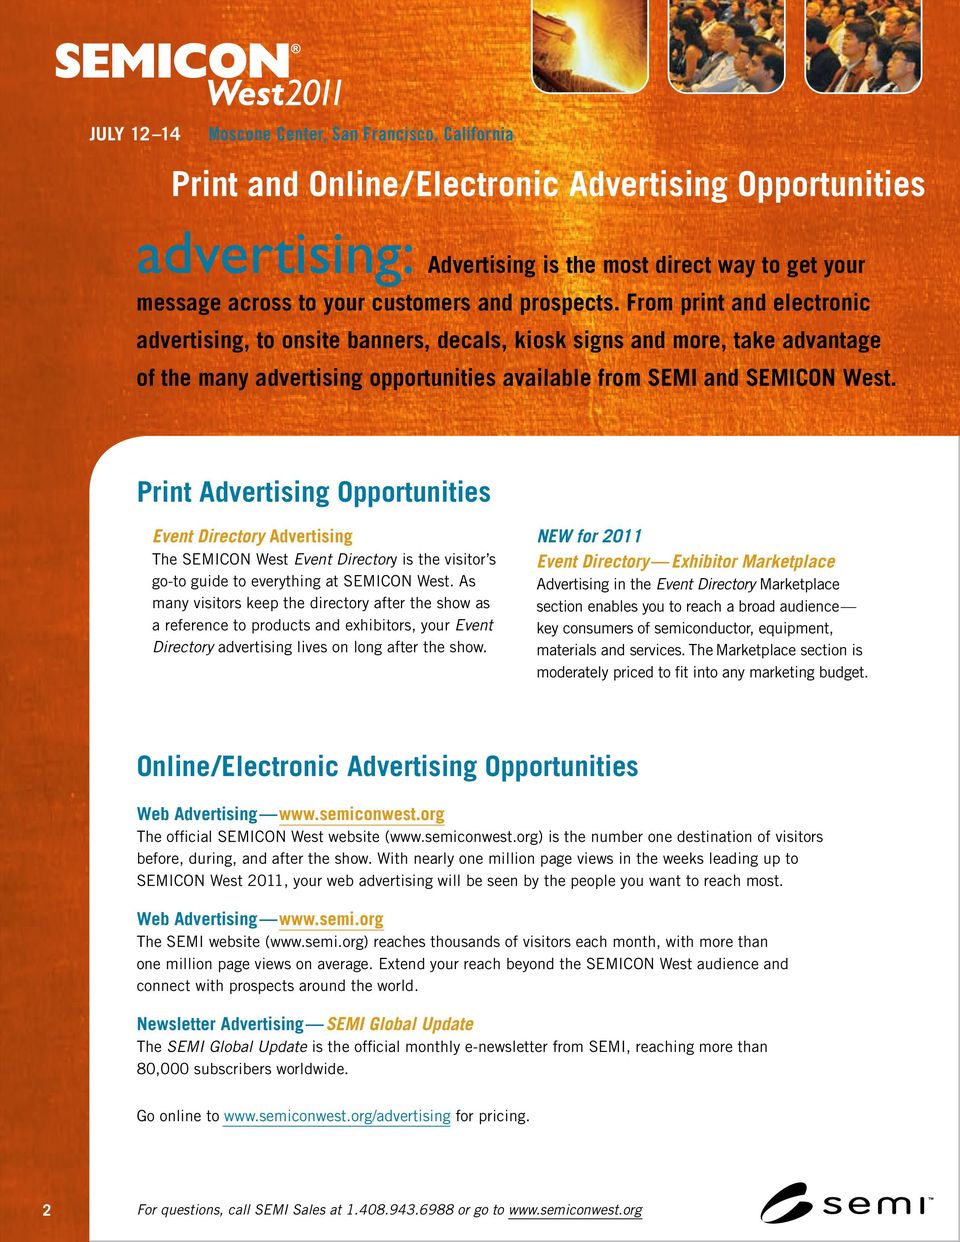 Print Advertising Opportunities Event Directory Advertising The SEMICON West Event Directory is the visitor s go-to guide to everything at SEMICON West.